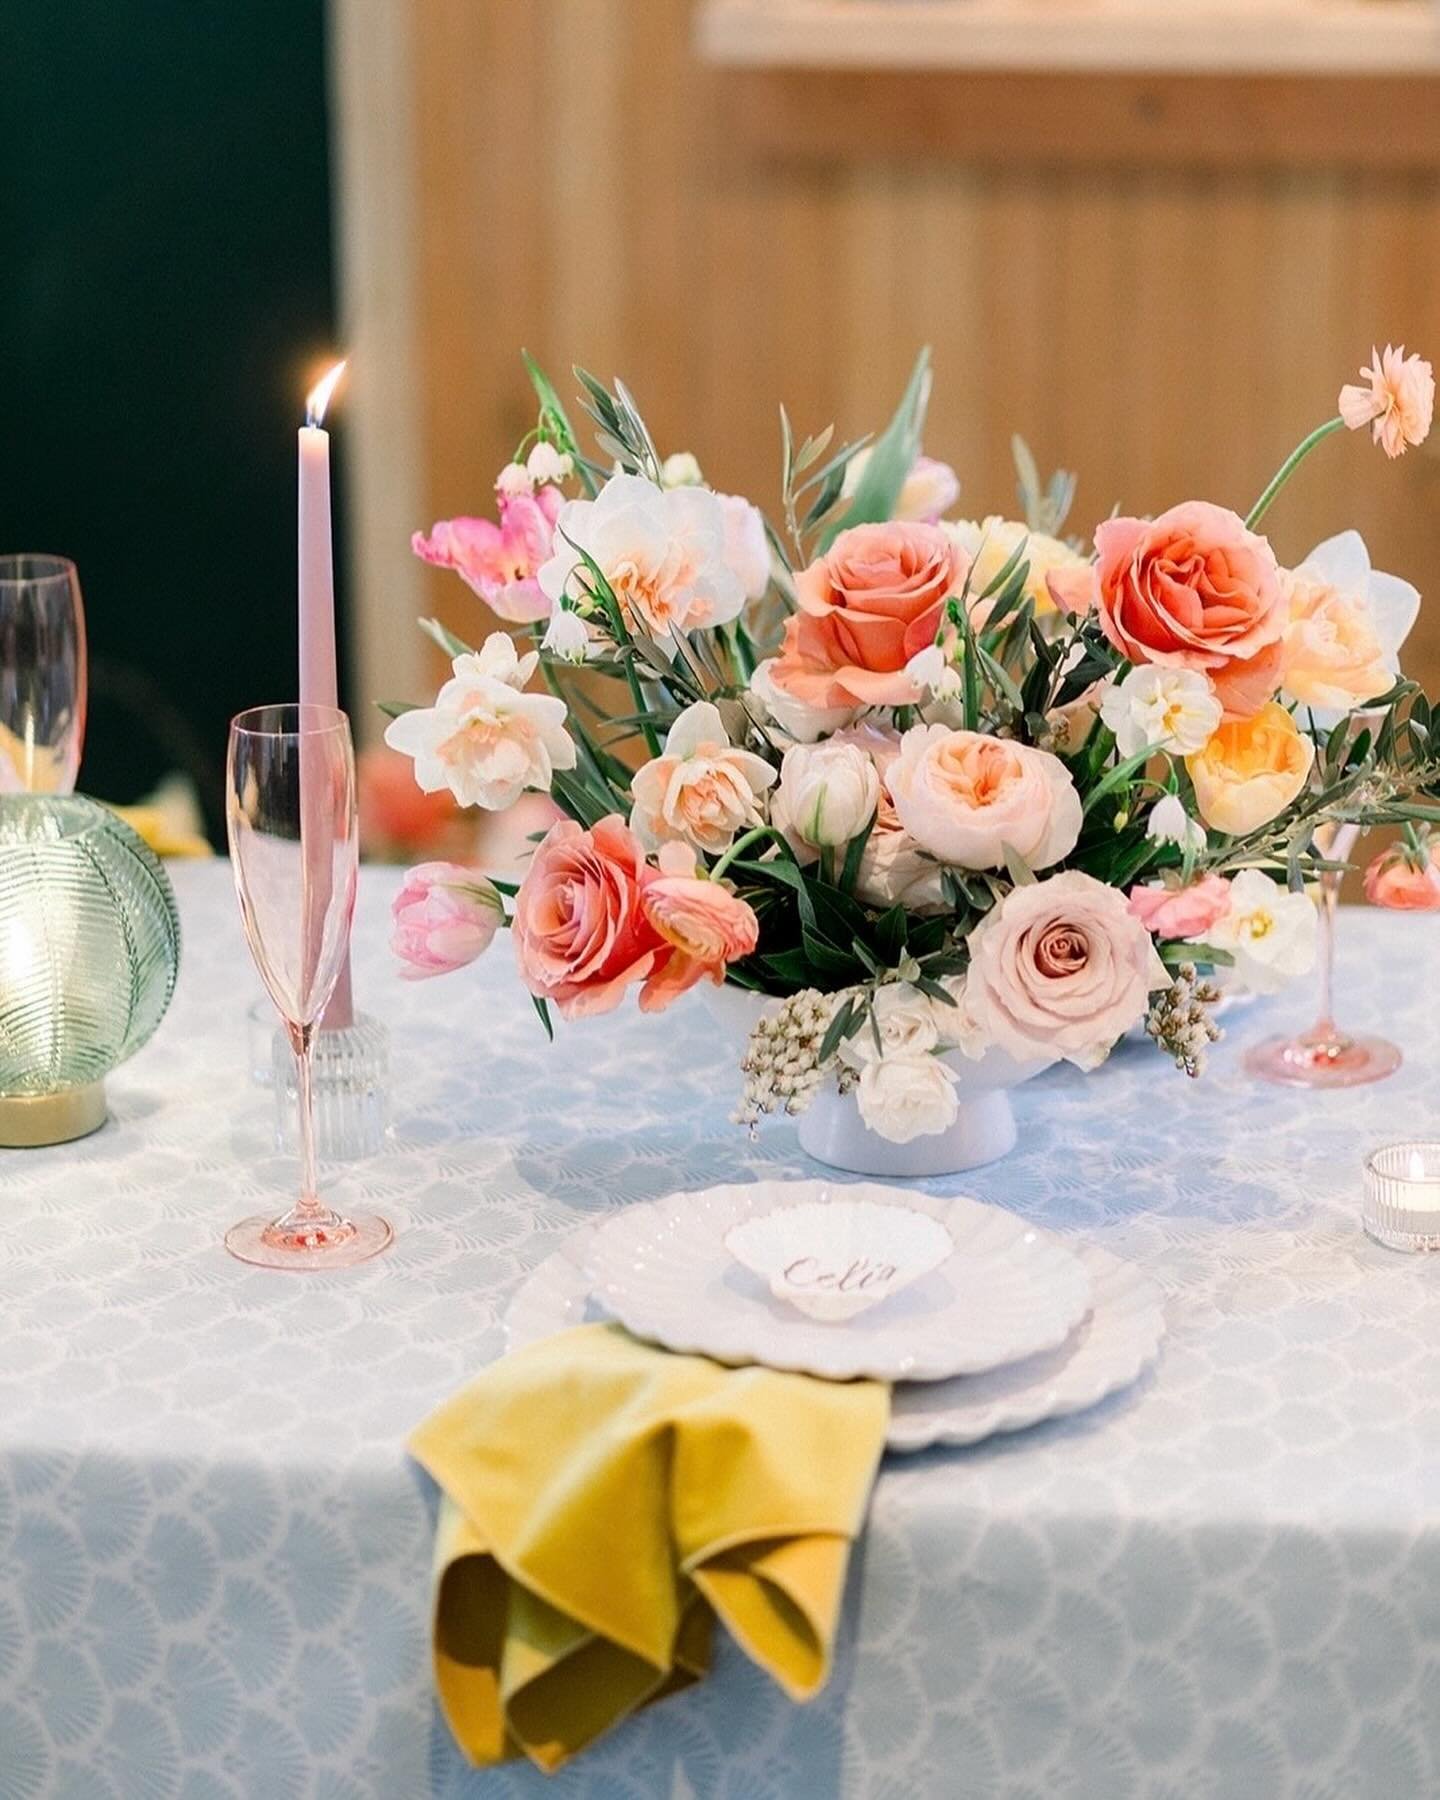 I gotta show off my design skills! Sometimes I have great ideas, promise! I wanted to create something fun and colorful for the @queerafengagementparty a few weeks ago. Using gorgeous linen and velvet napkins from @reverie_social; @crateandbarrel sca